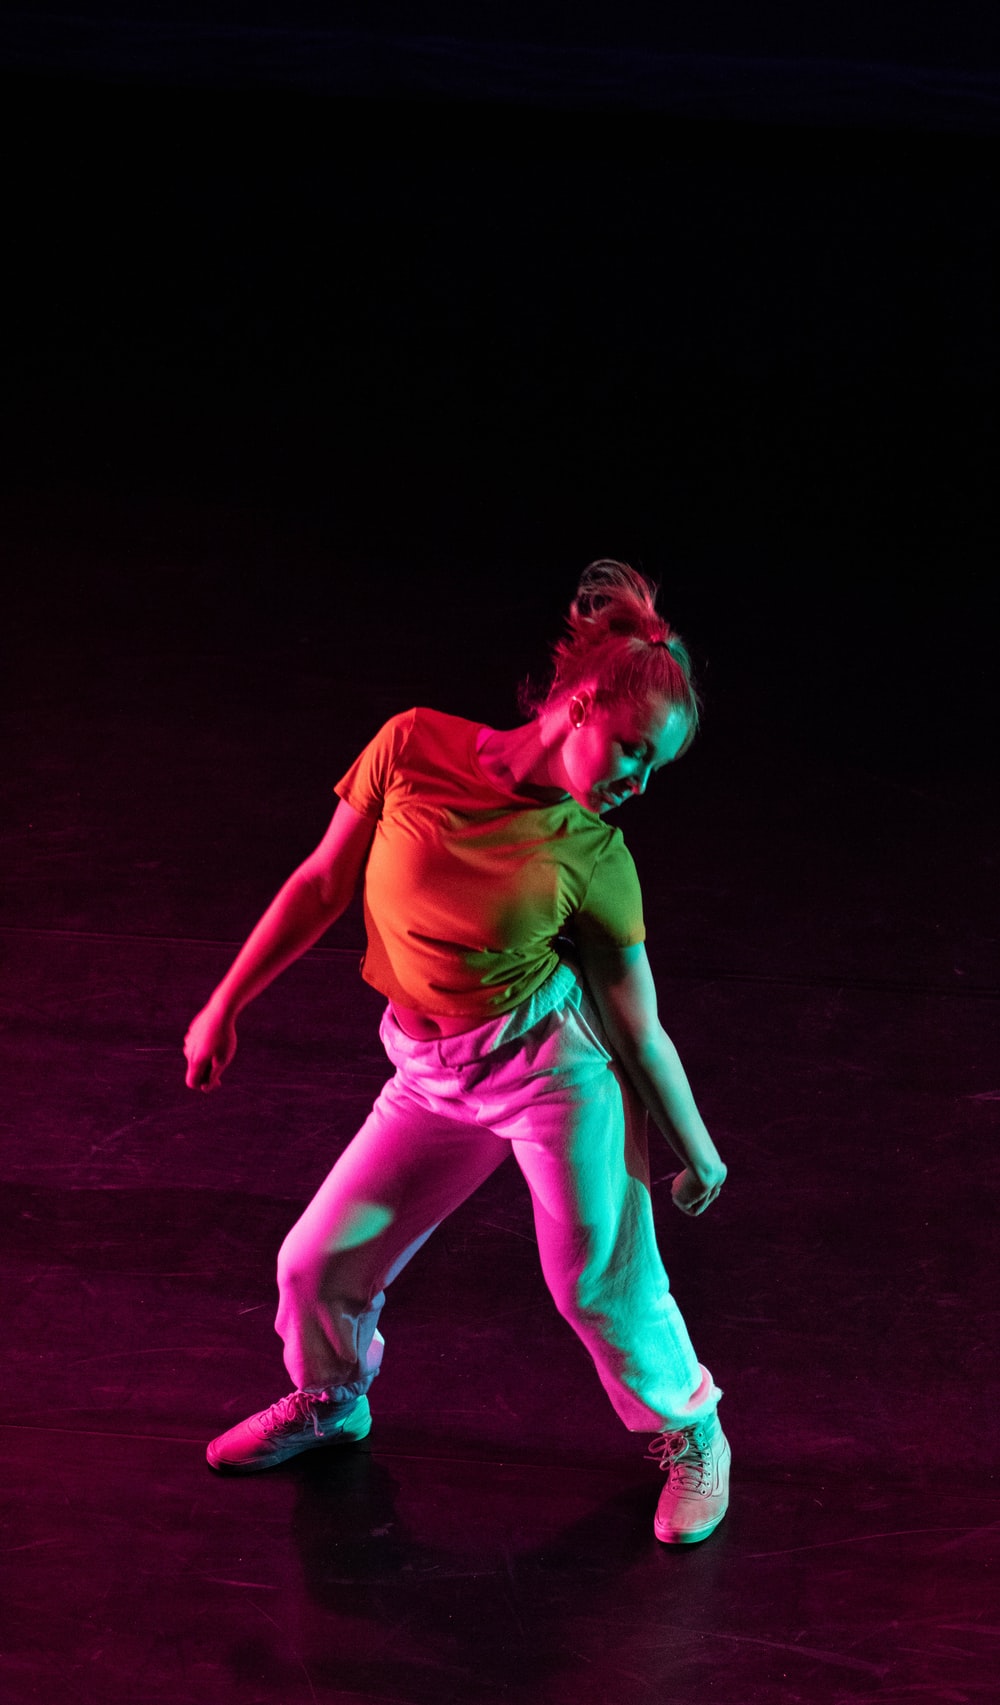 woman dancing on stage photo